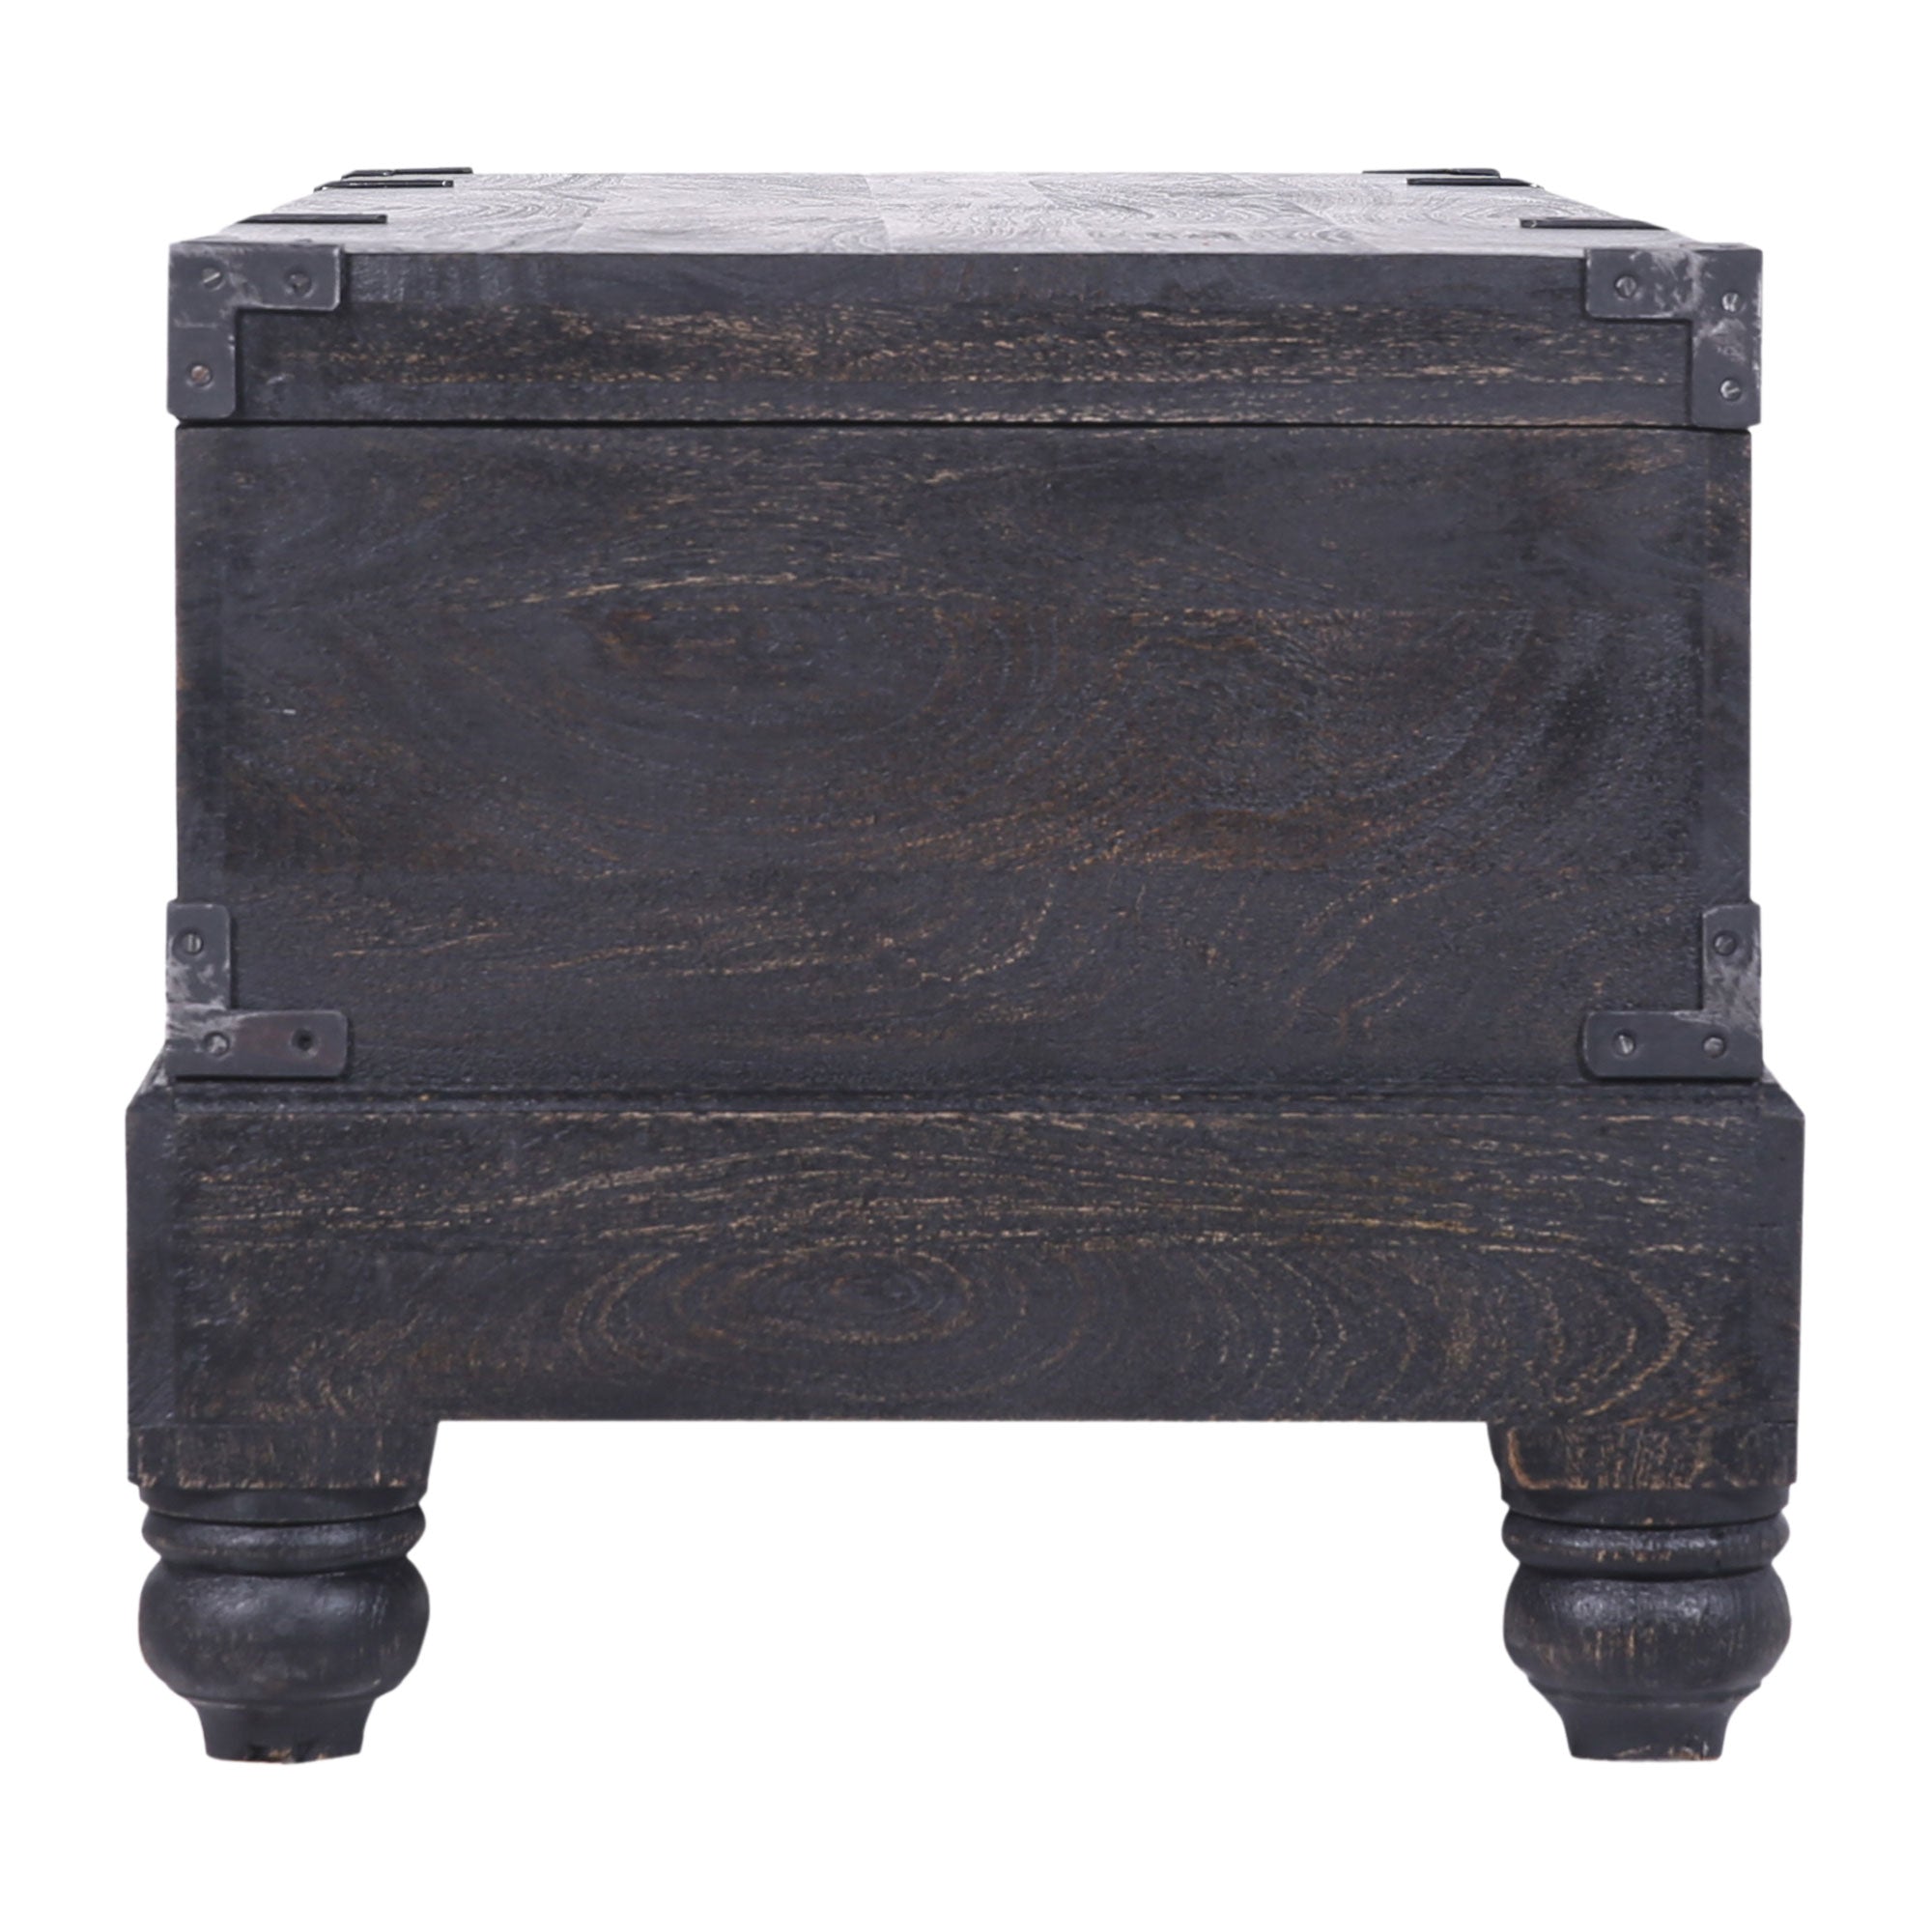 Nerio Nomad Wooden Storage Bench in Black Distressed Finish in Ottomans & Benches by VMInnovations